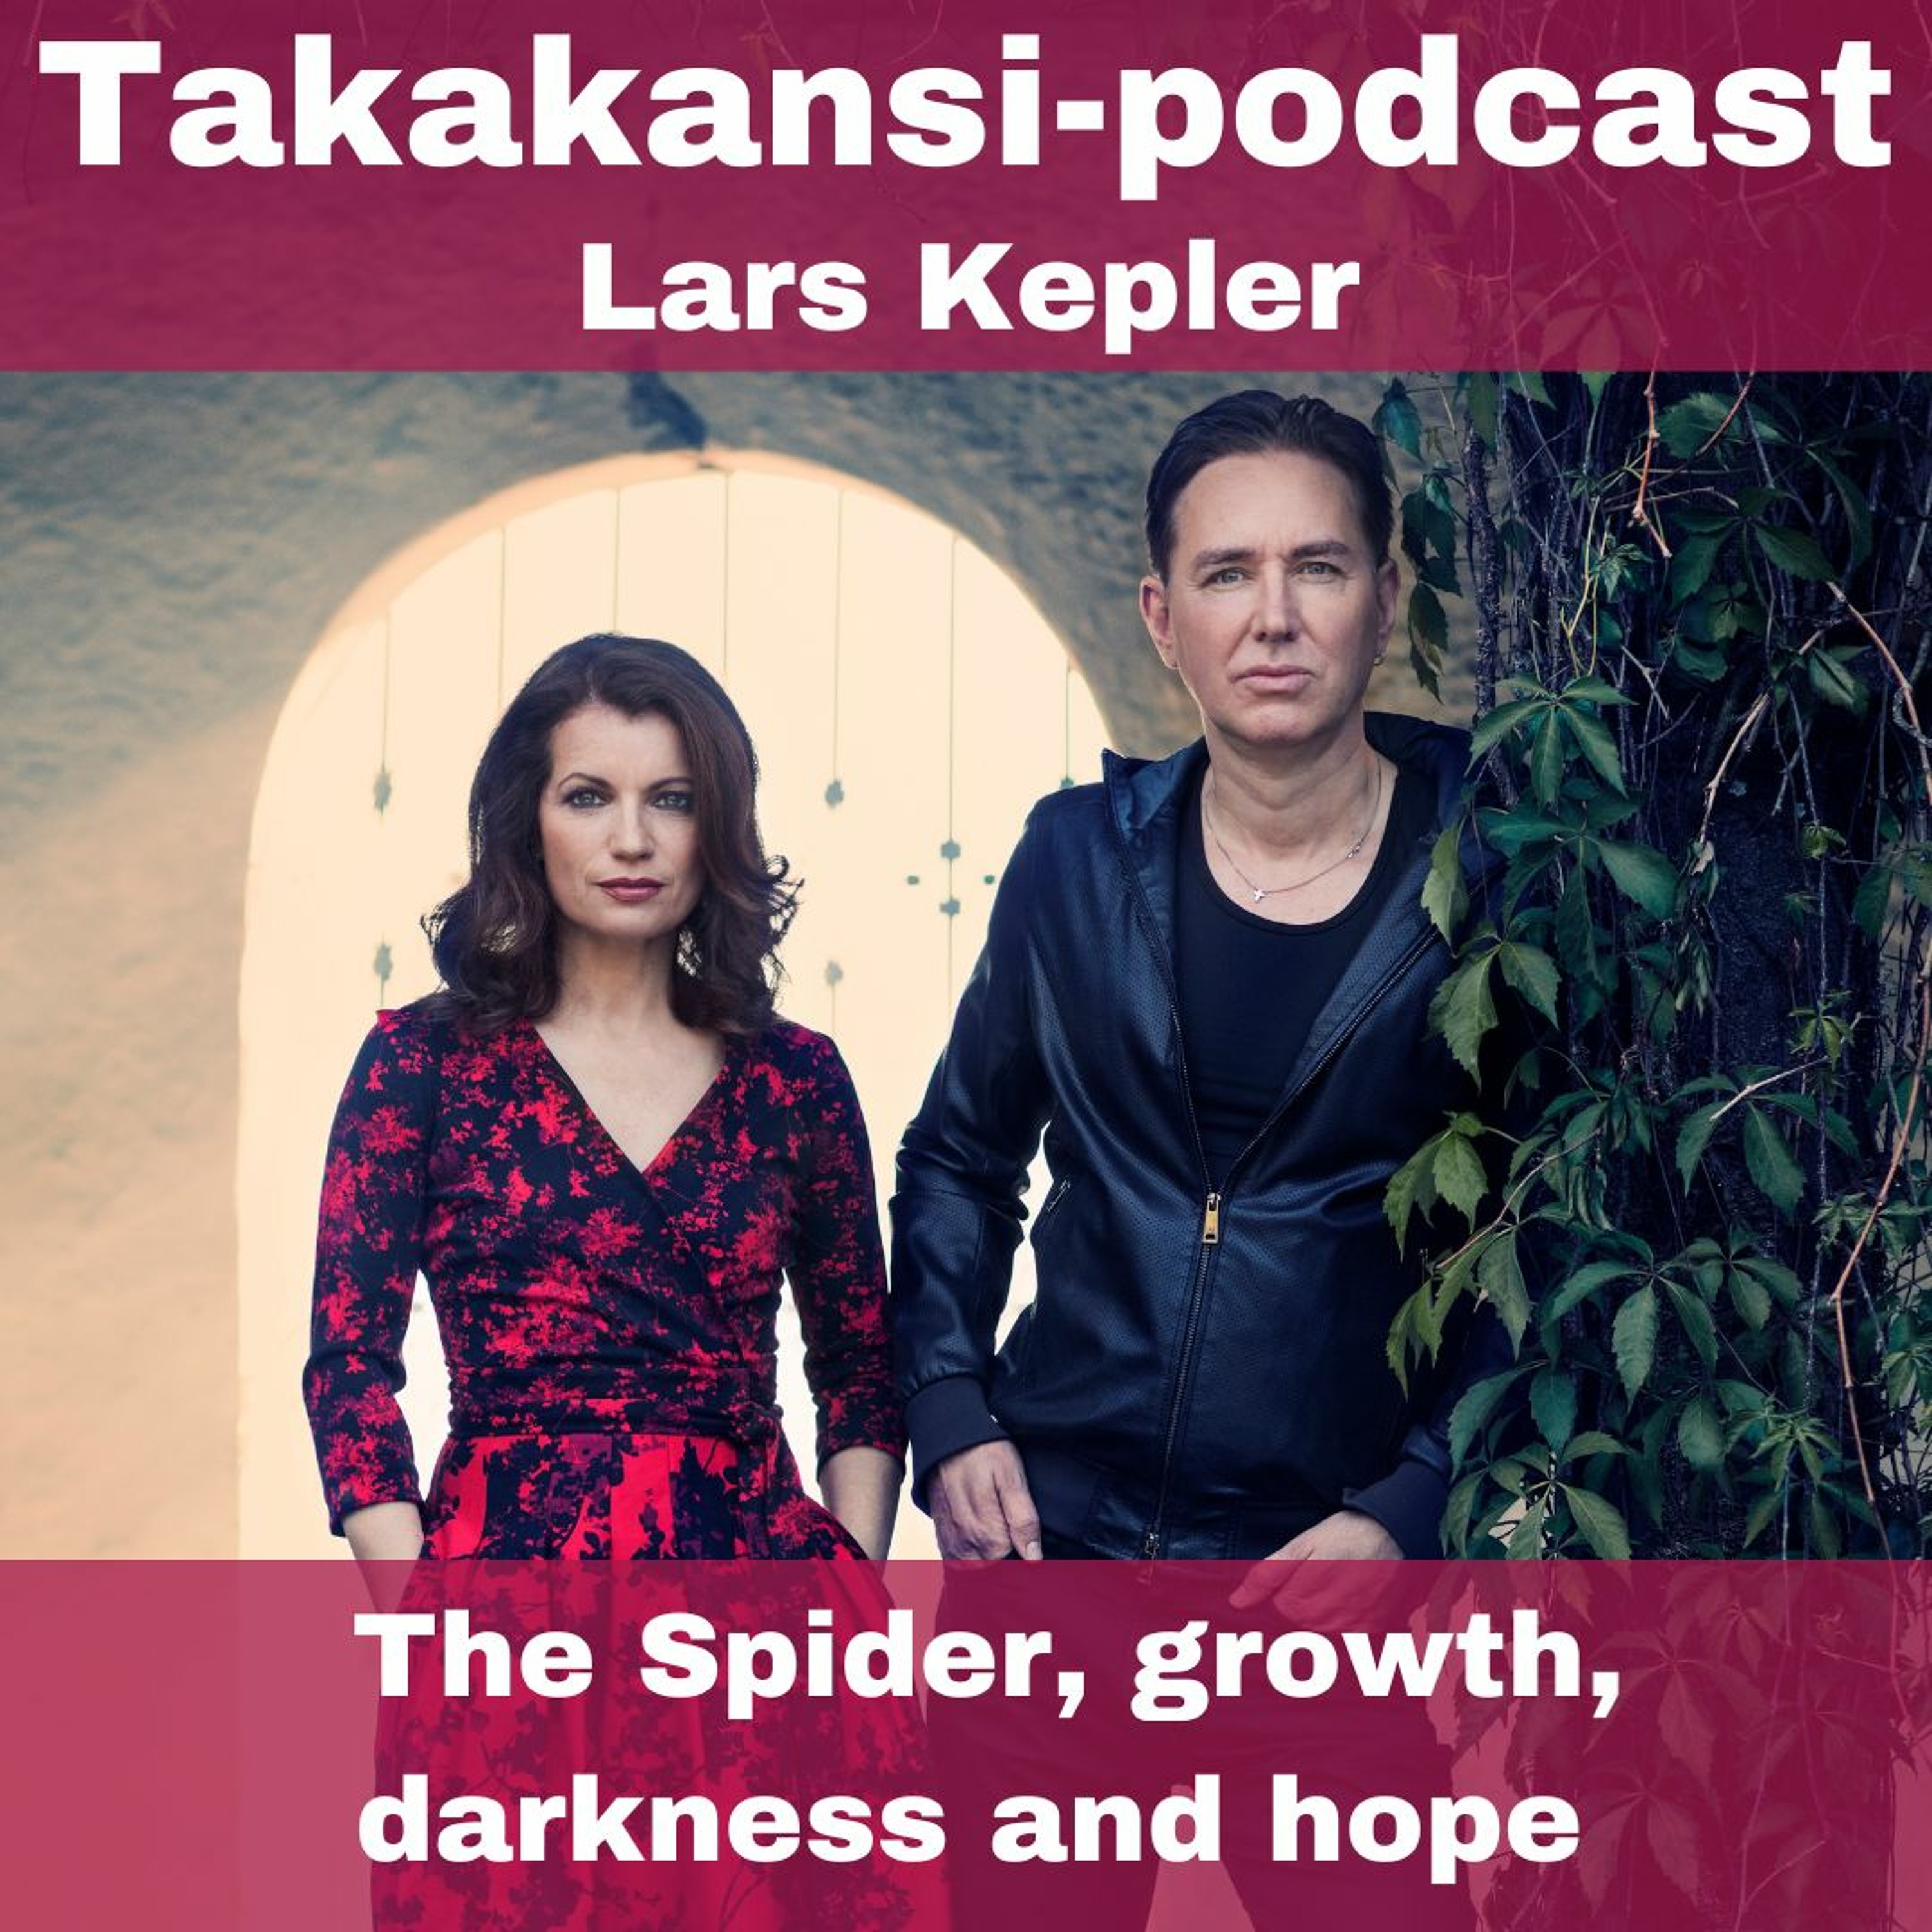 Lars Kepler - The Spider, growth, darkness and hope